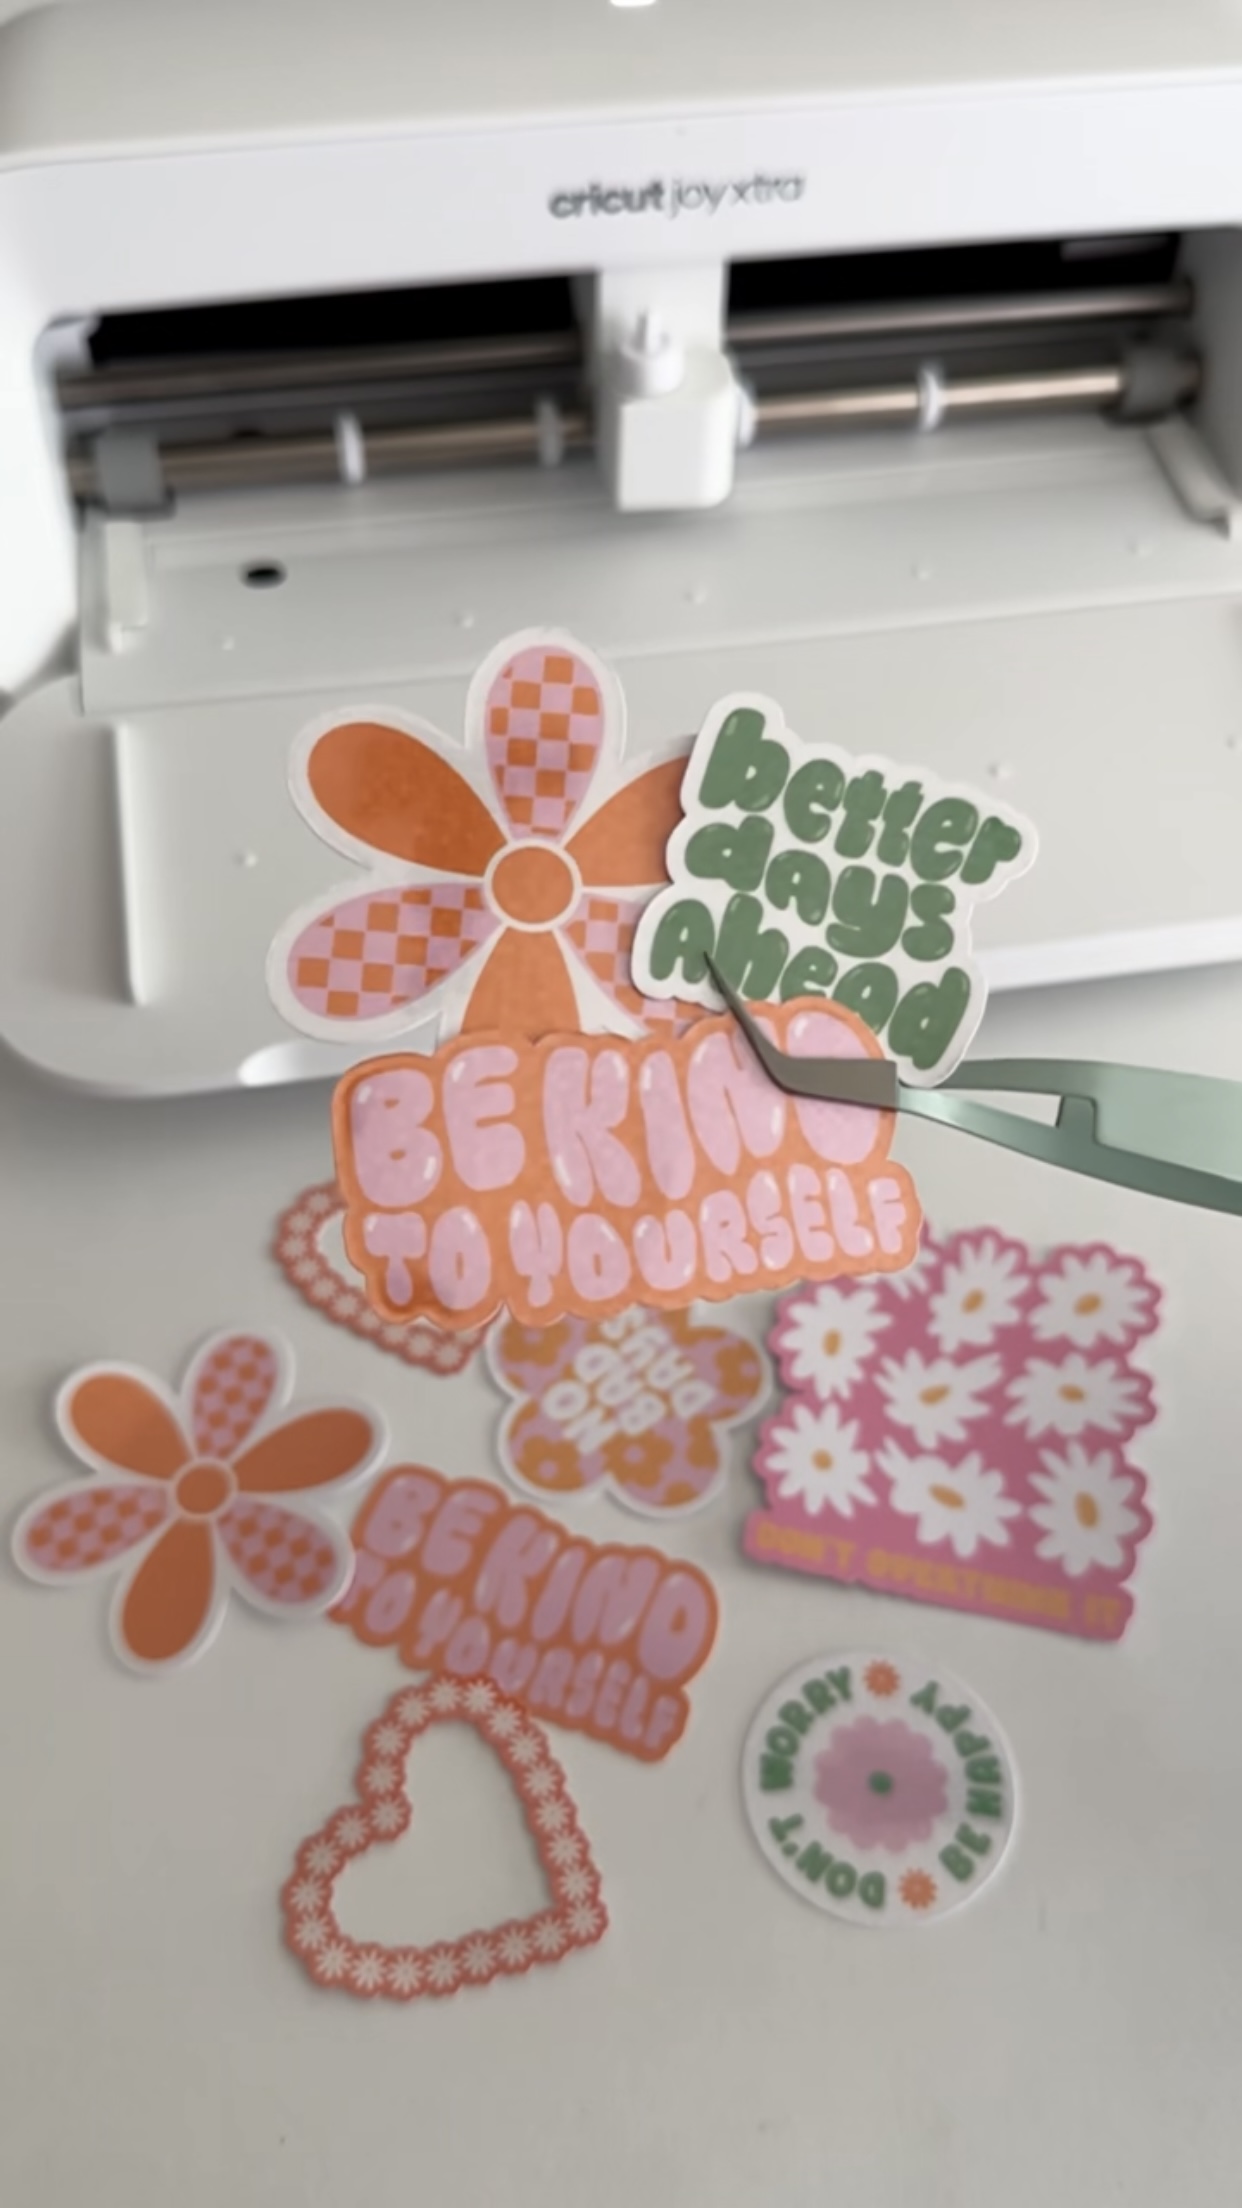 Making Water Bottle Stickers with the Cricut Joy Xtra